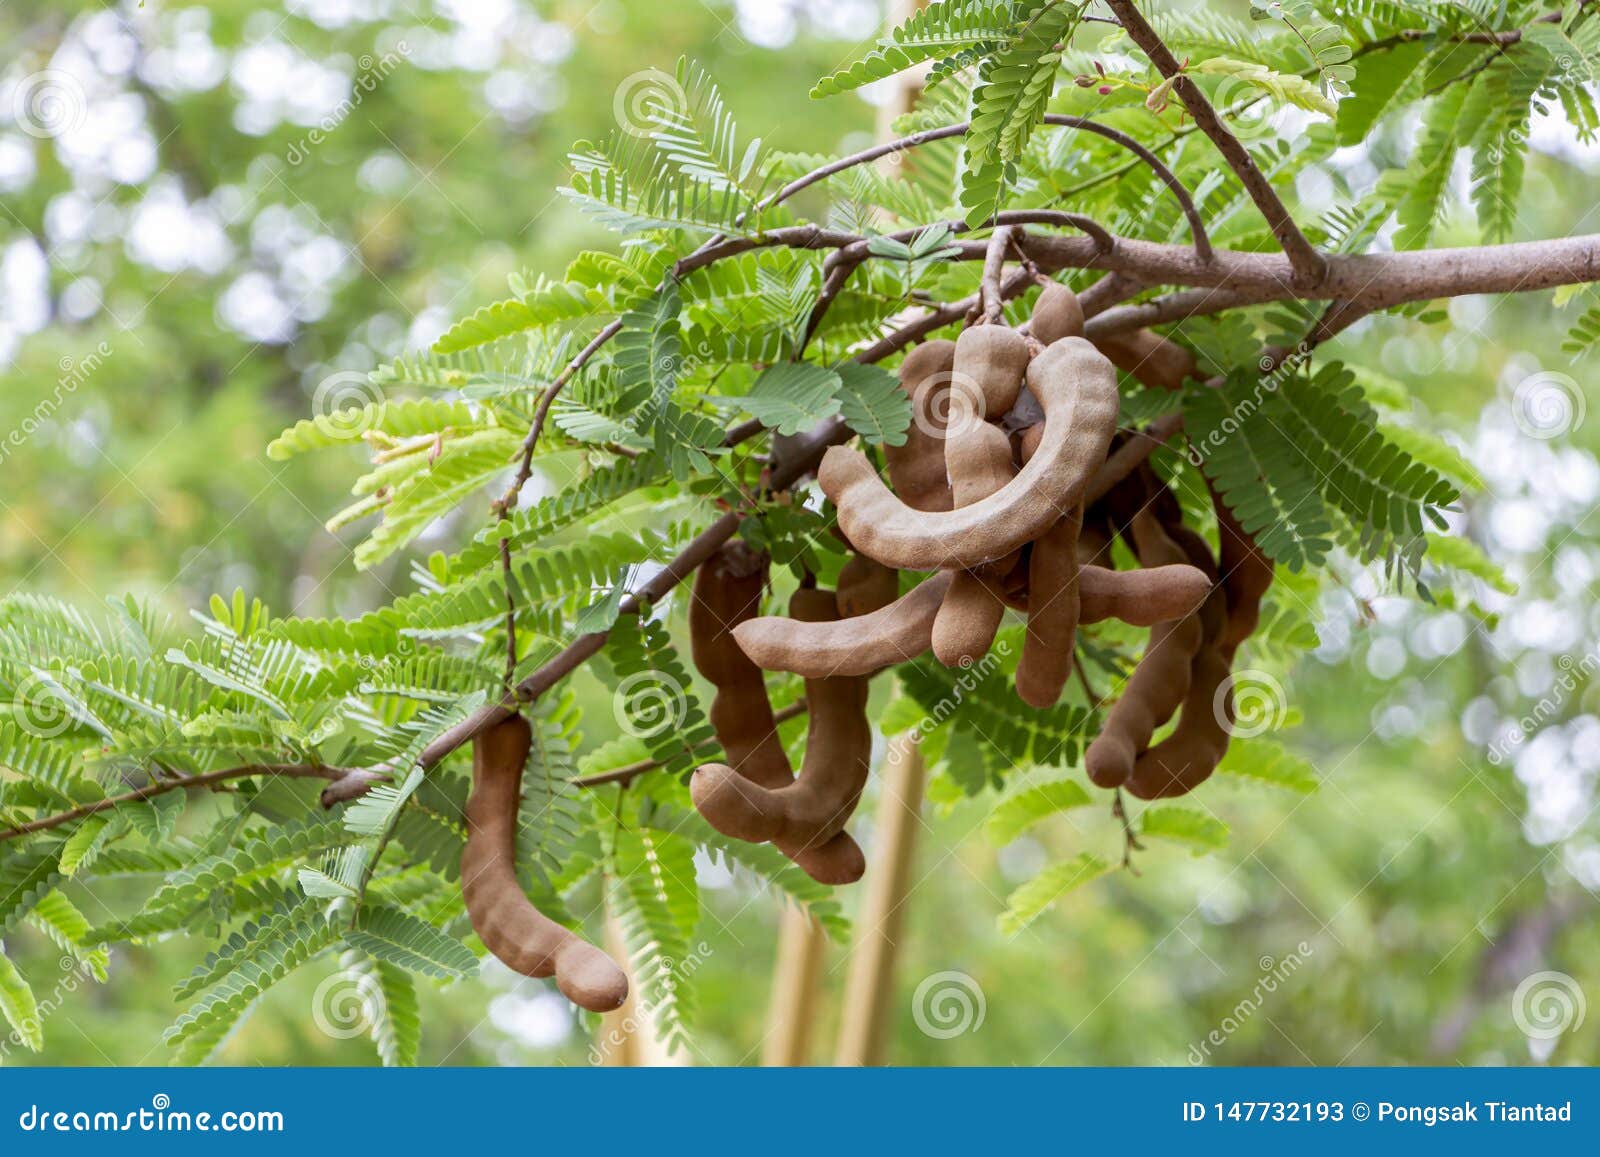 Fresh Tamarind Fruit And Leaf On Tree In Tropical Tramarind Used As A Flavoring In Asian Cooking Stock Image Image Of Healthy Group